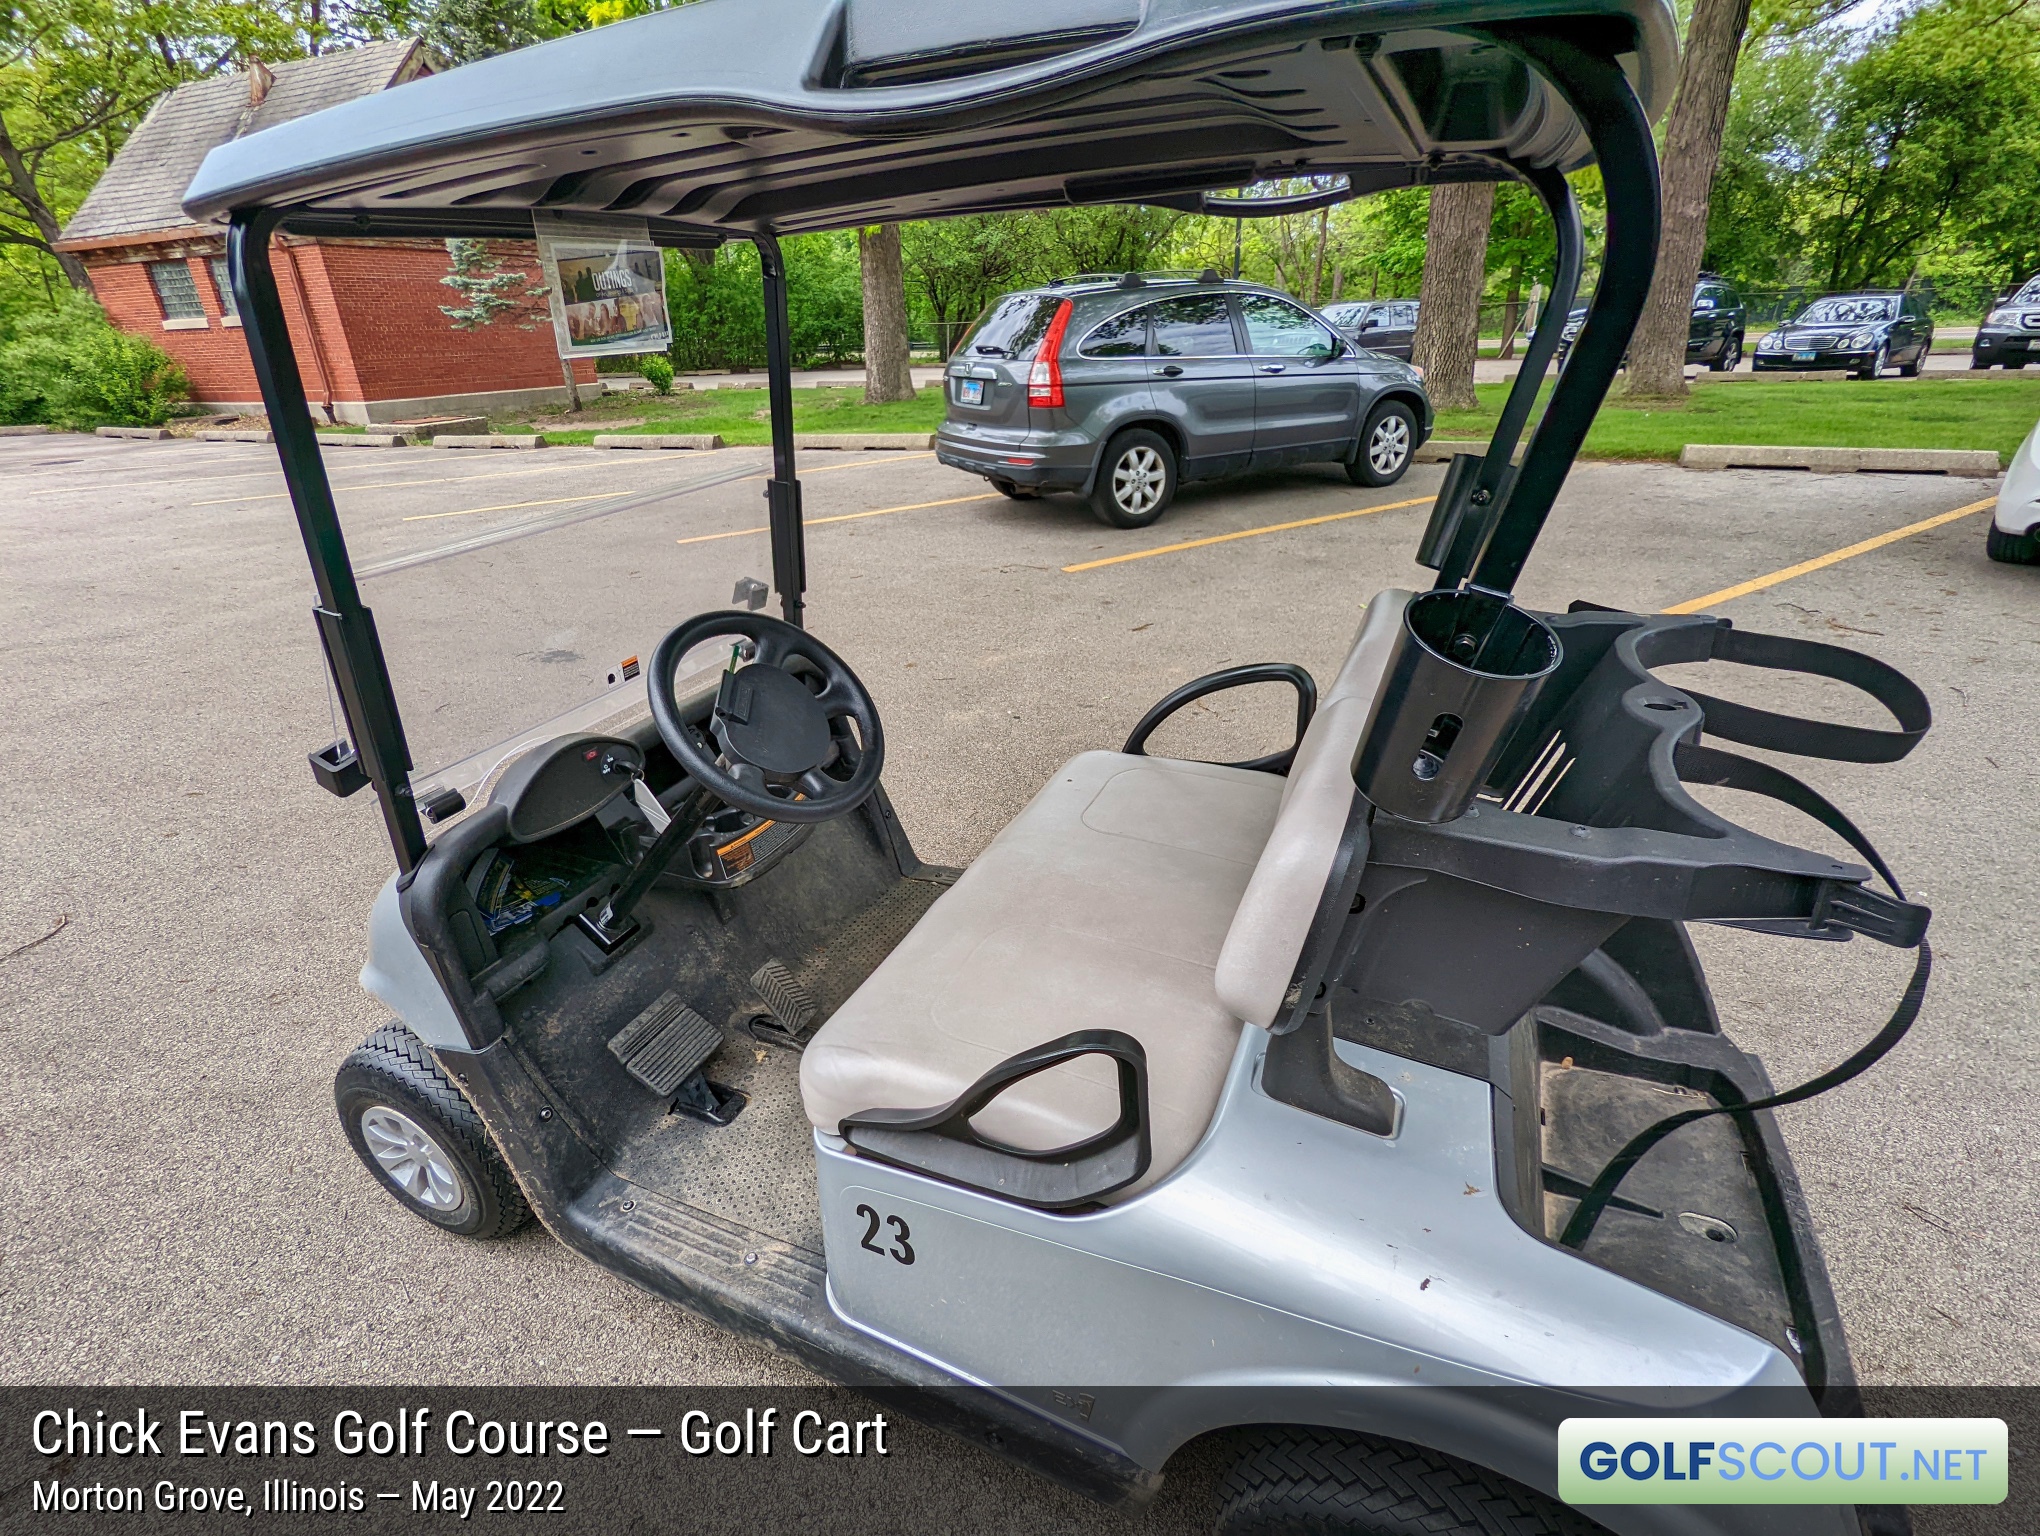 Photo of the golf carts at Chick Evans Golf Course in Morton Grove, Illinois. Bonus points for the silver color. Better than the standard tan color at most public courses.